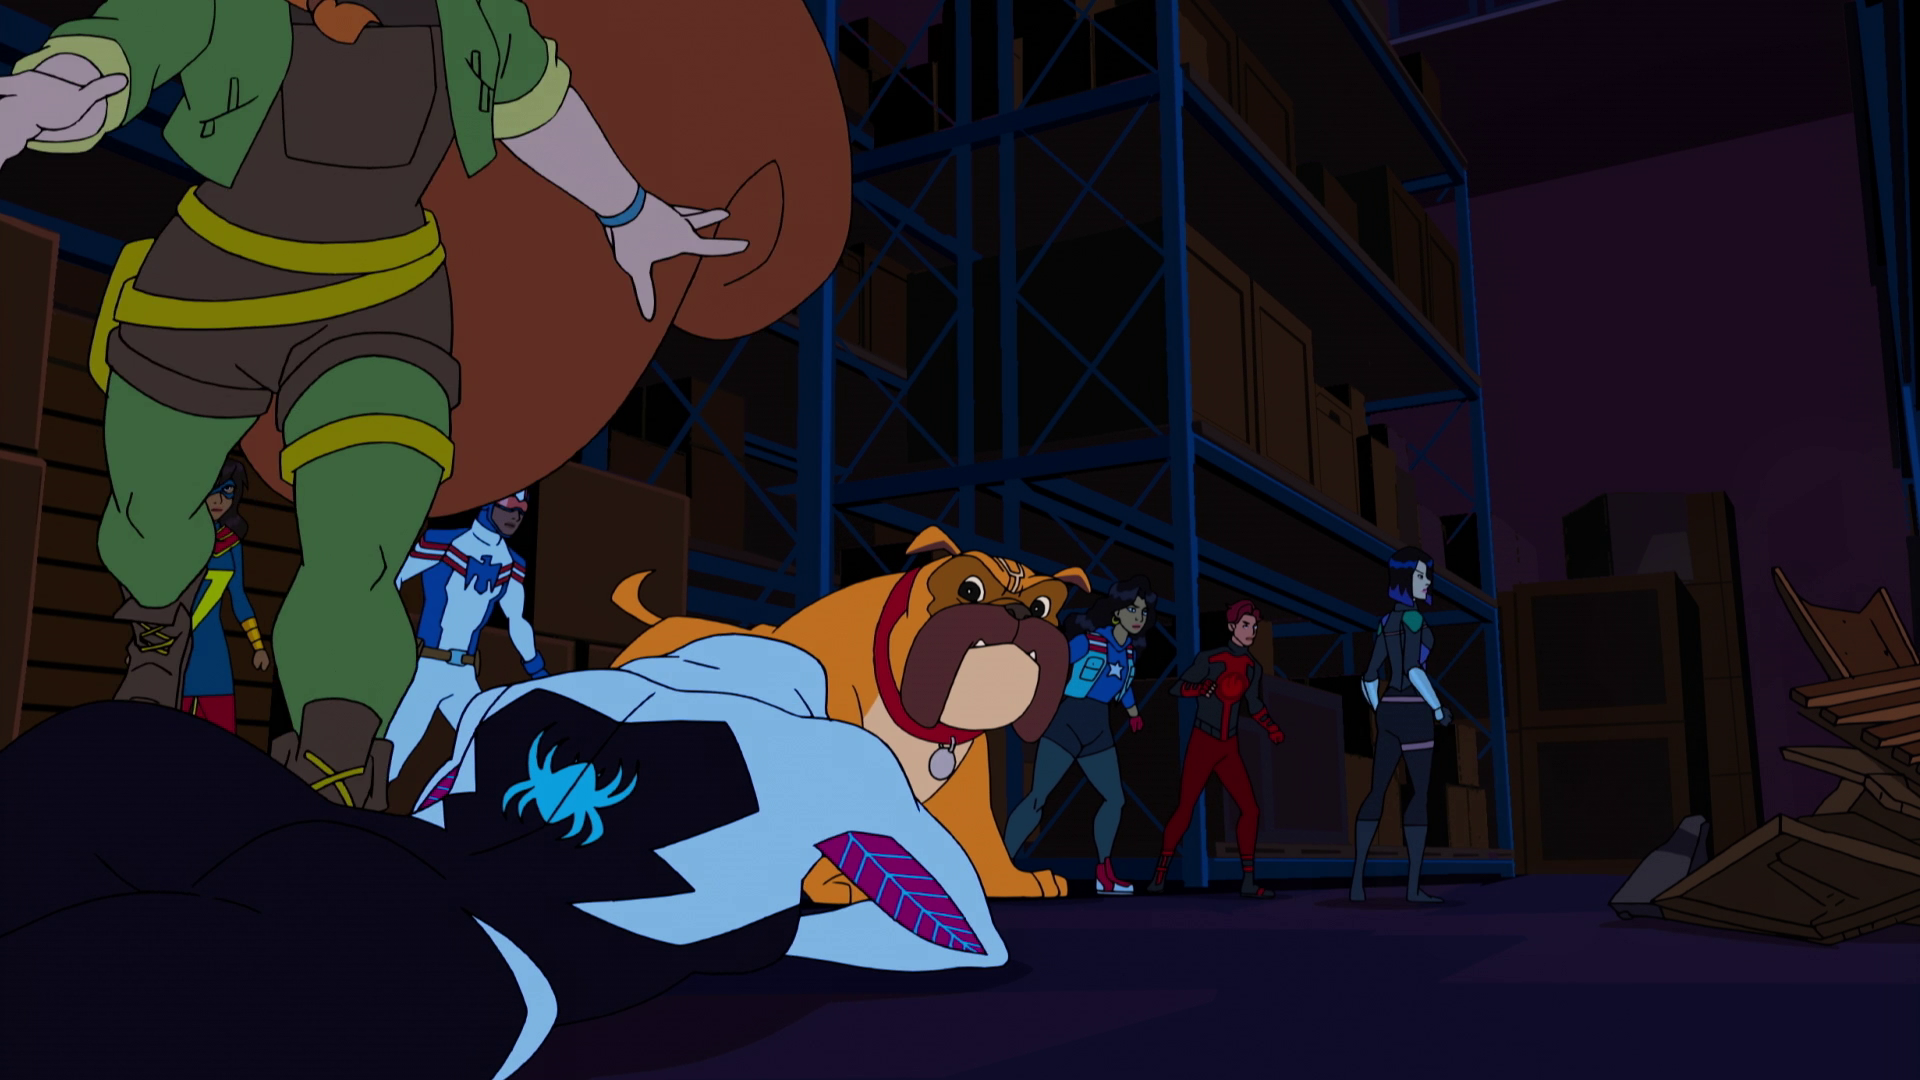 Marvel Rising Chasing Ghosts [1080p] WEB-DL